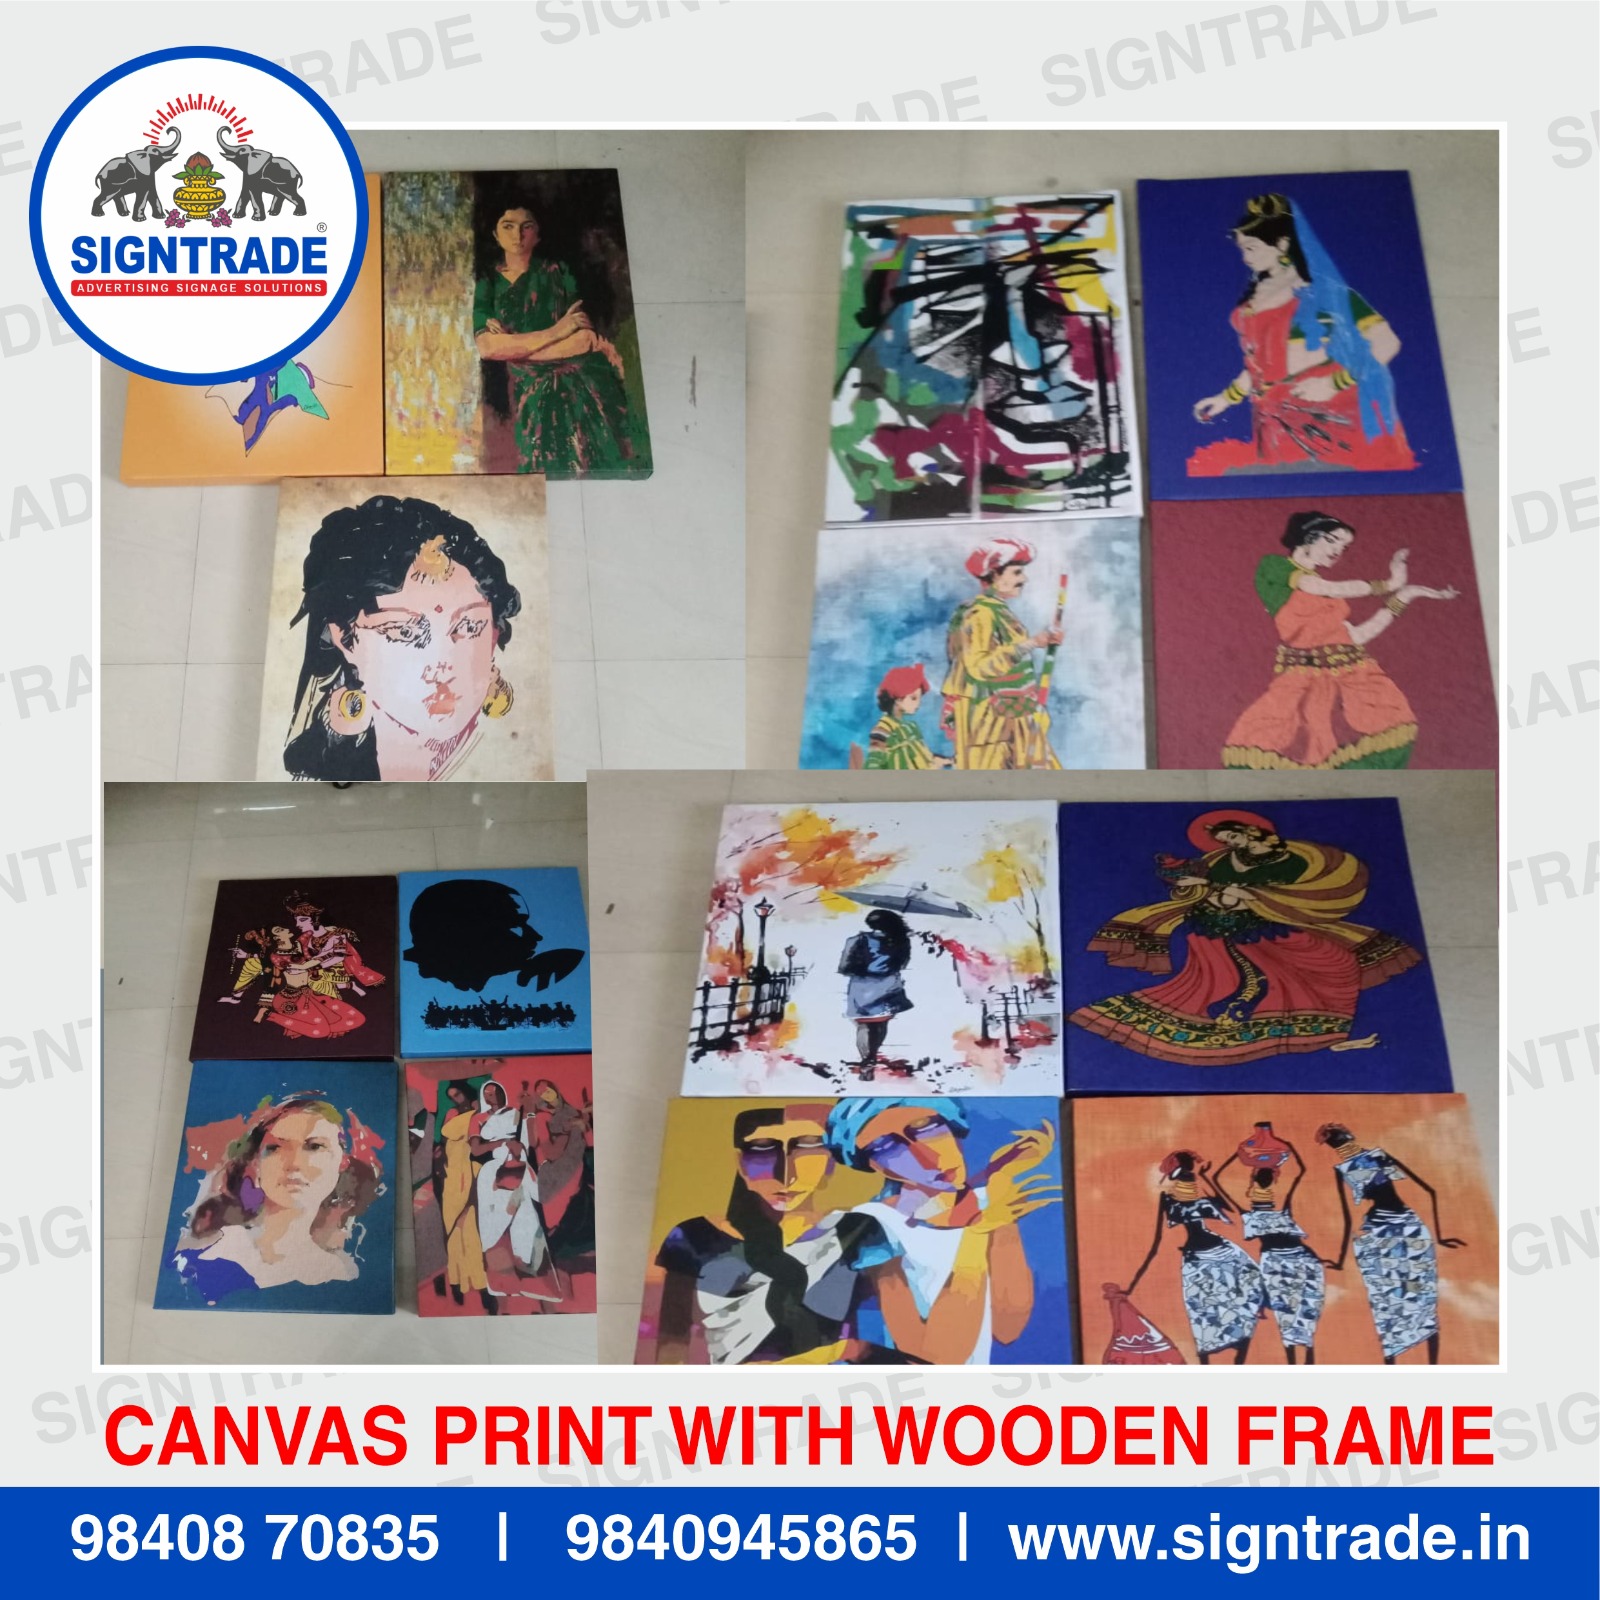 Canvas Printing Services in Chennai